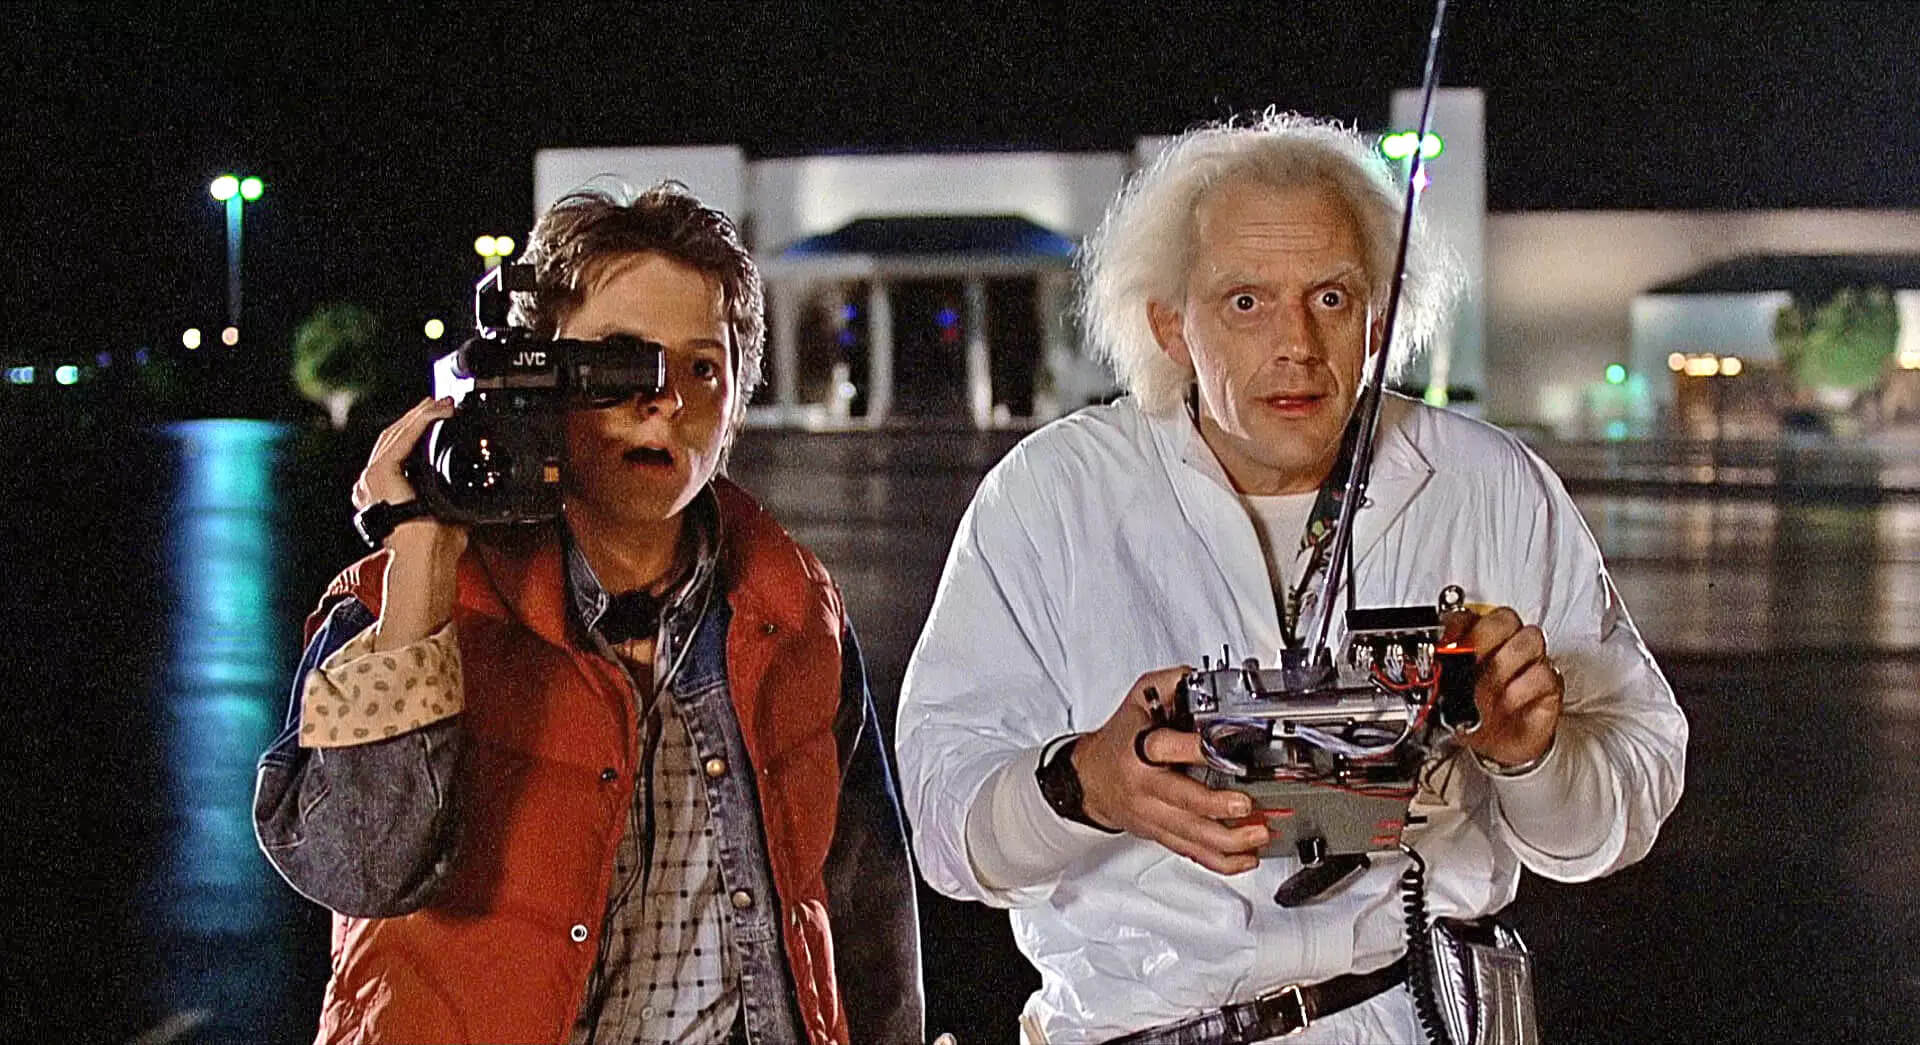 Michael J Fox in Back to the Future films